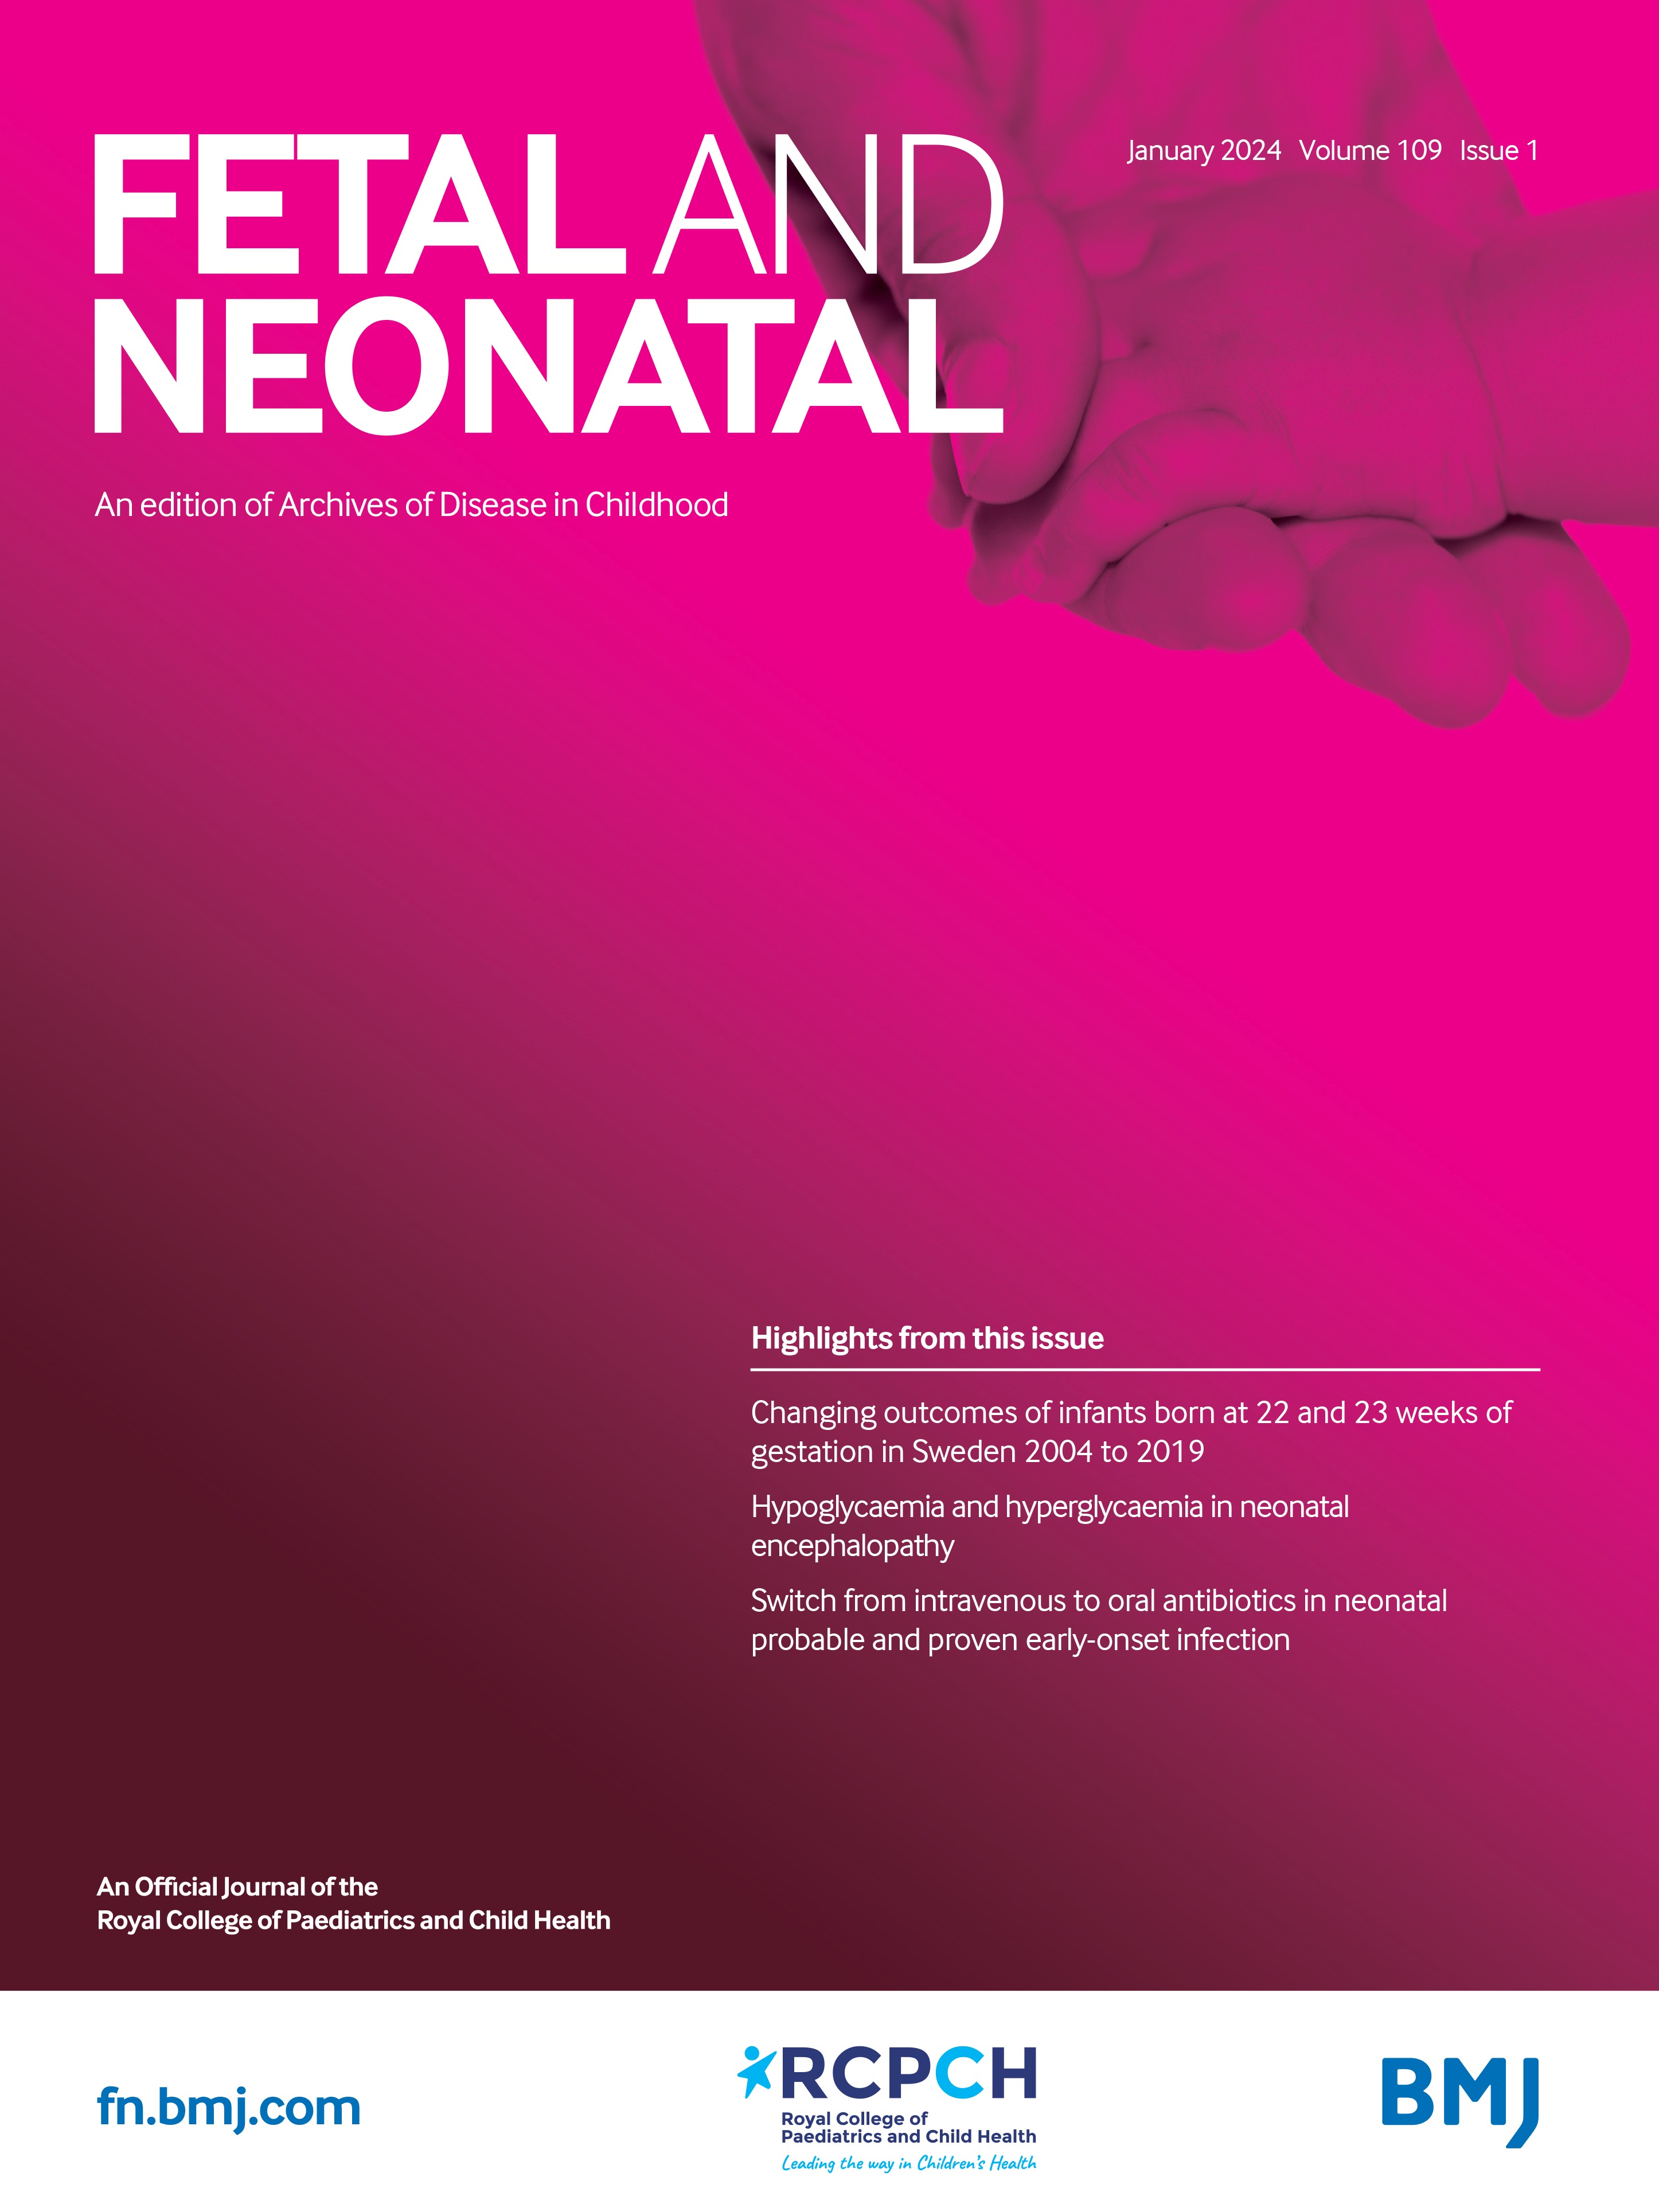 Hypoglycaemia and hyperglycaemia in neonatal encephalopathy: a systematic review and meta-analysis